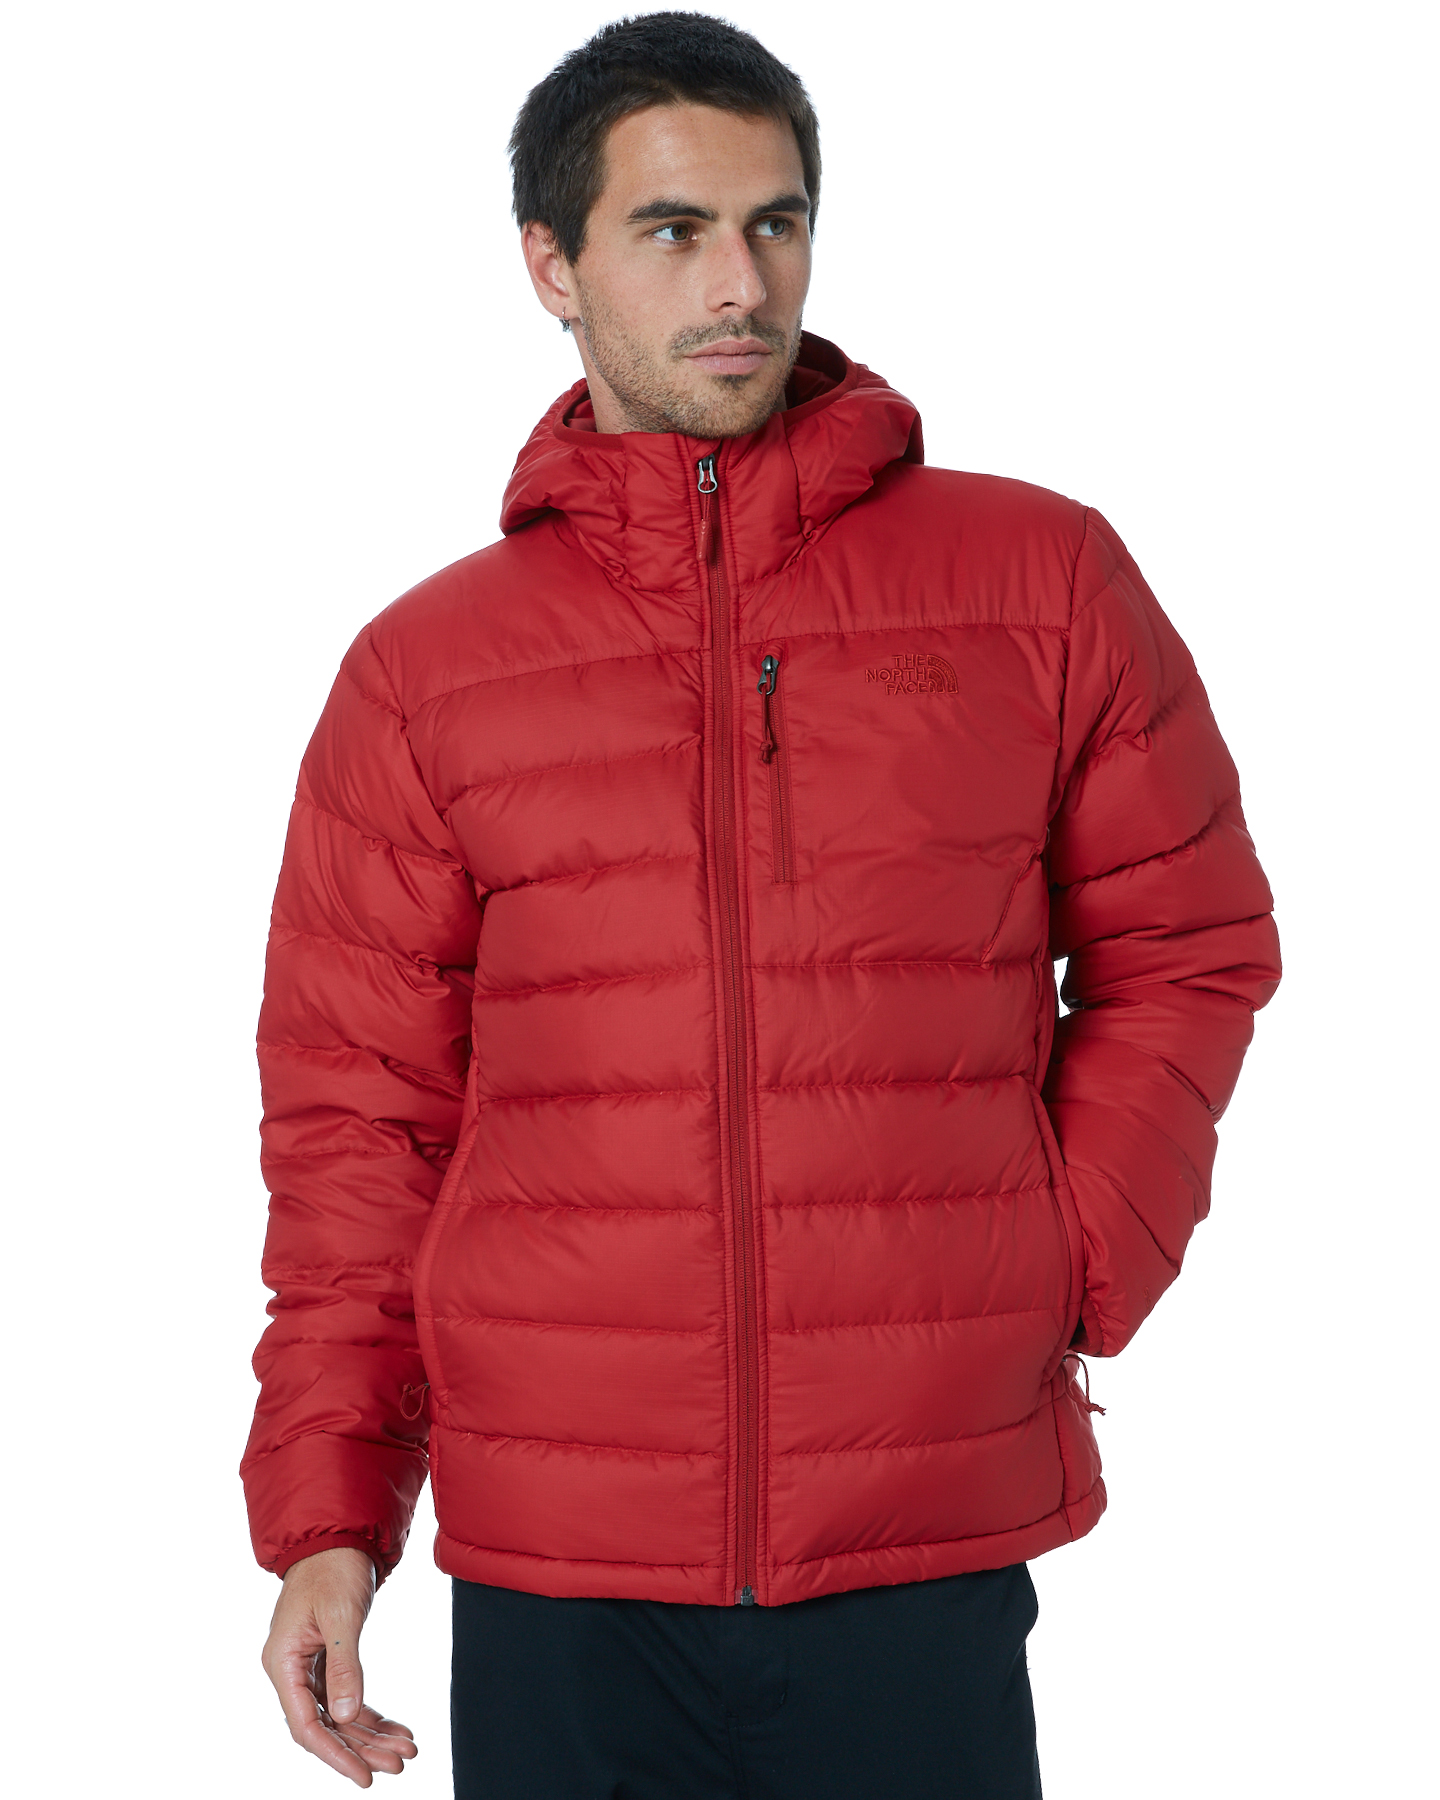 north face cardinal red